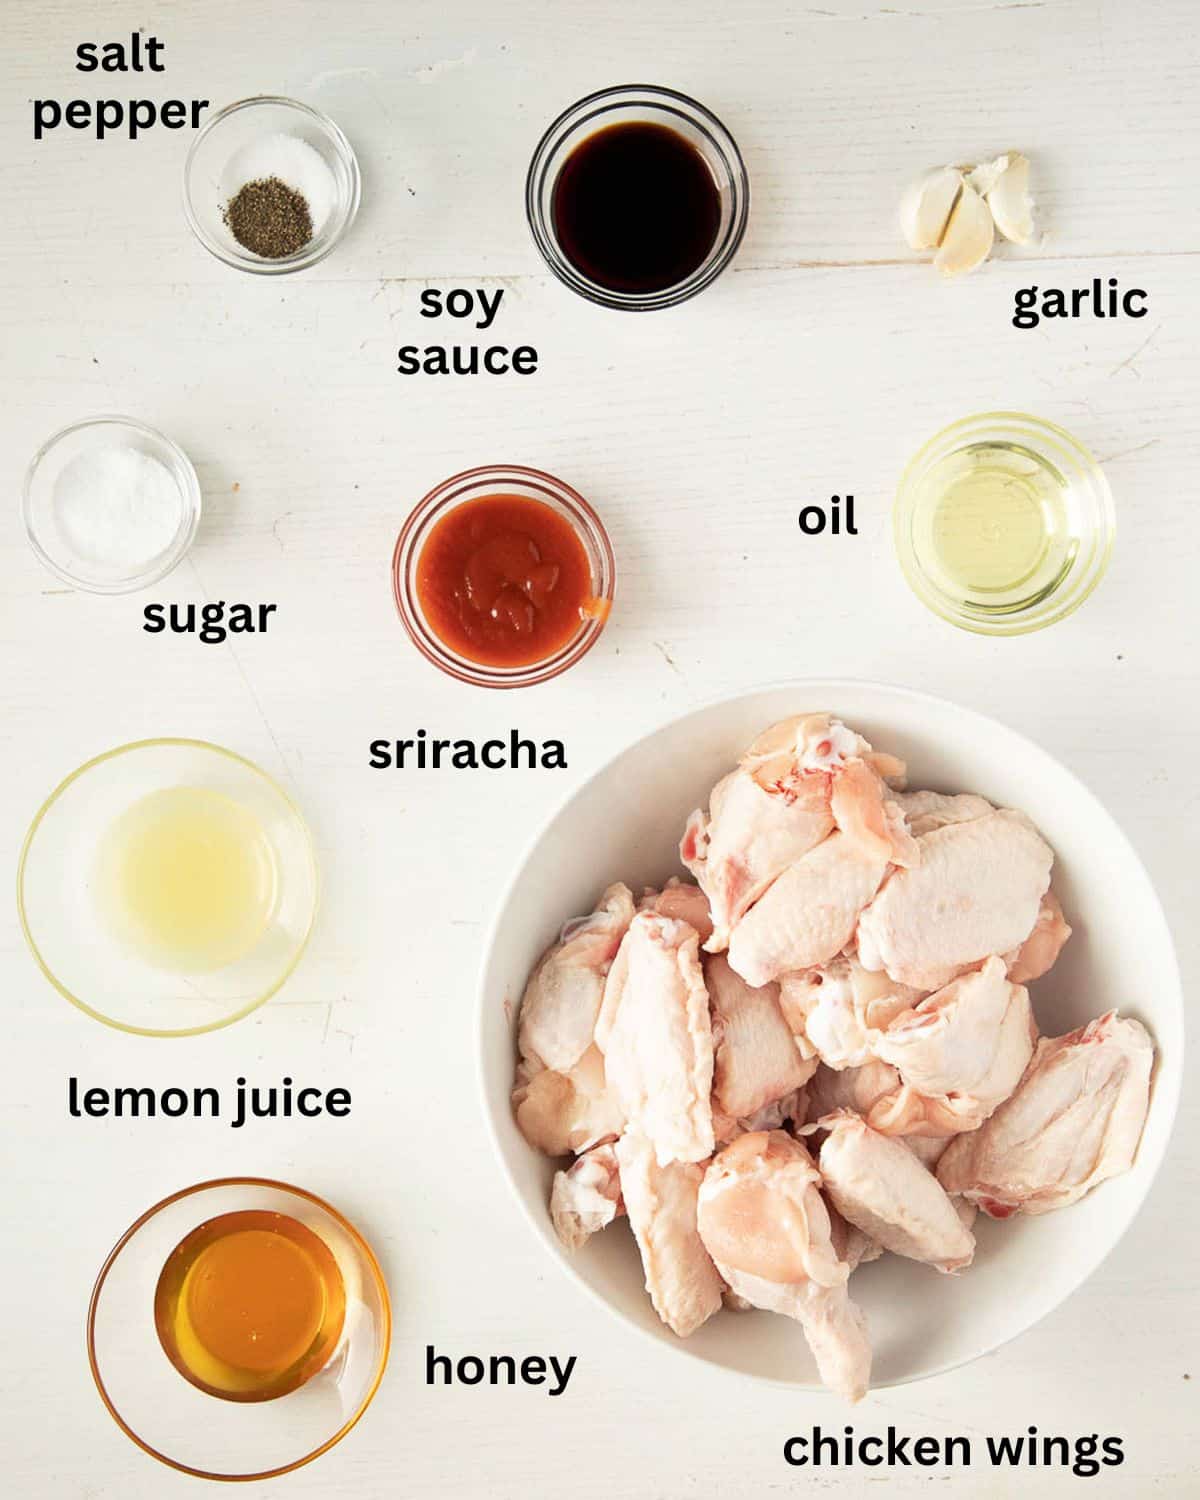 listed ingredients for making baked wings with hot sauce on a table.